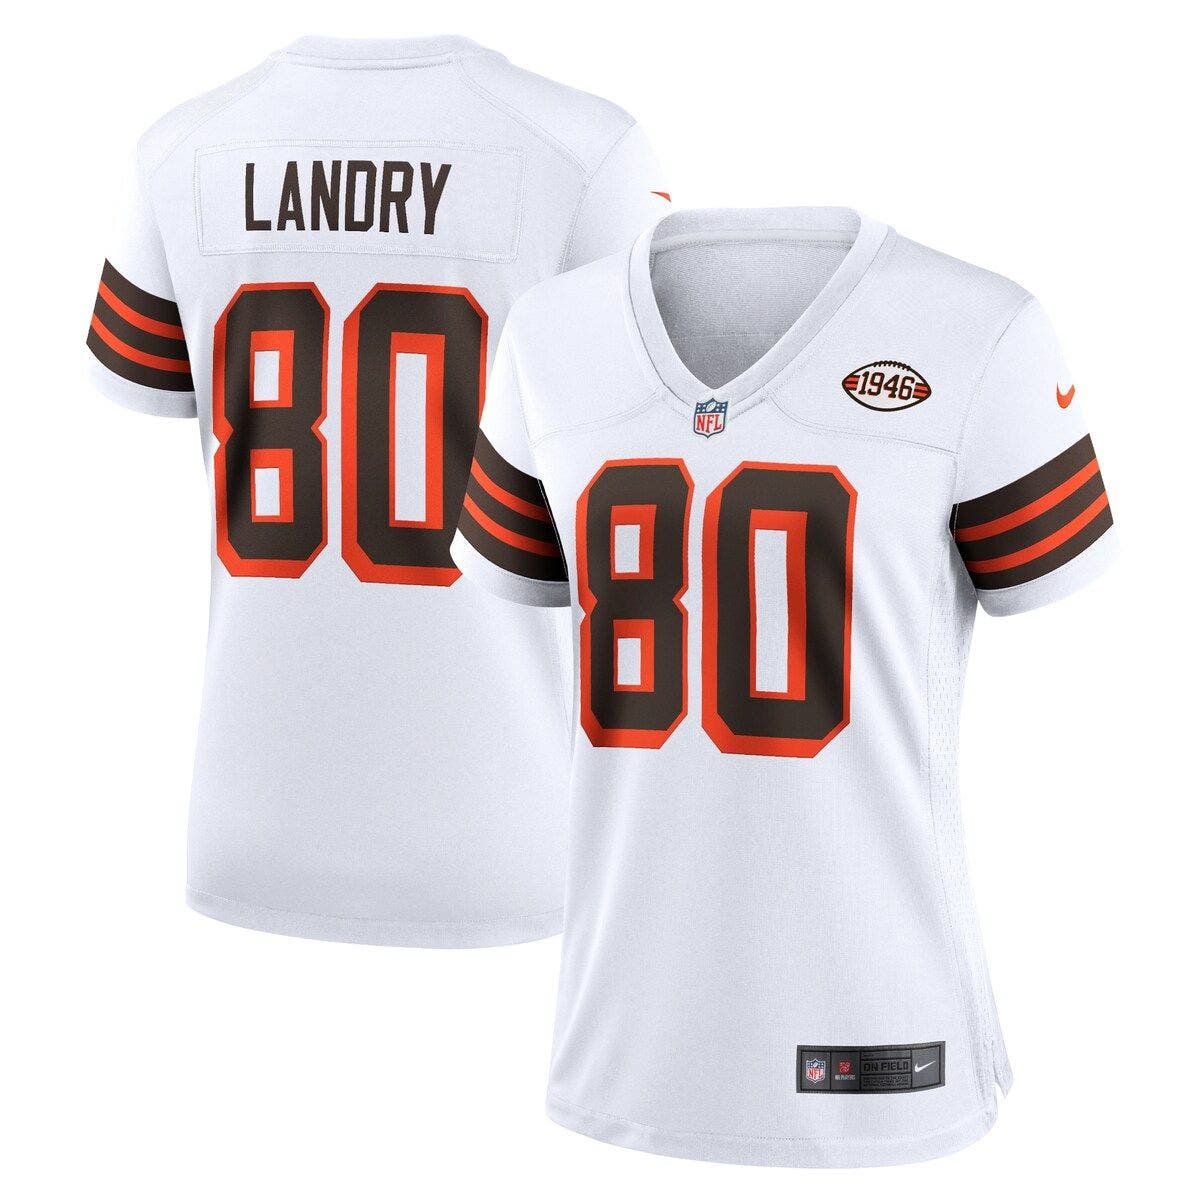 Womens Jarvis Landry White Cleveland Browns 1946 Collection Alternate Game Jersey at Nordstrom Nordstrom Women Sport & Swimwear Sportswear Sports Tops 